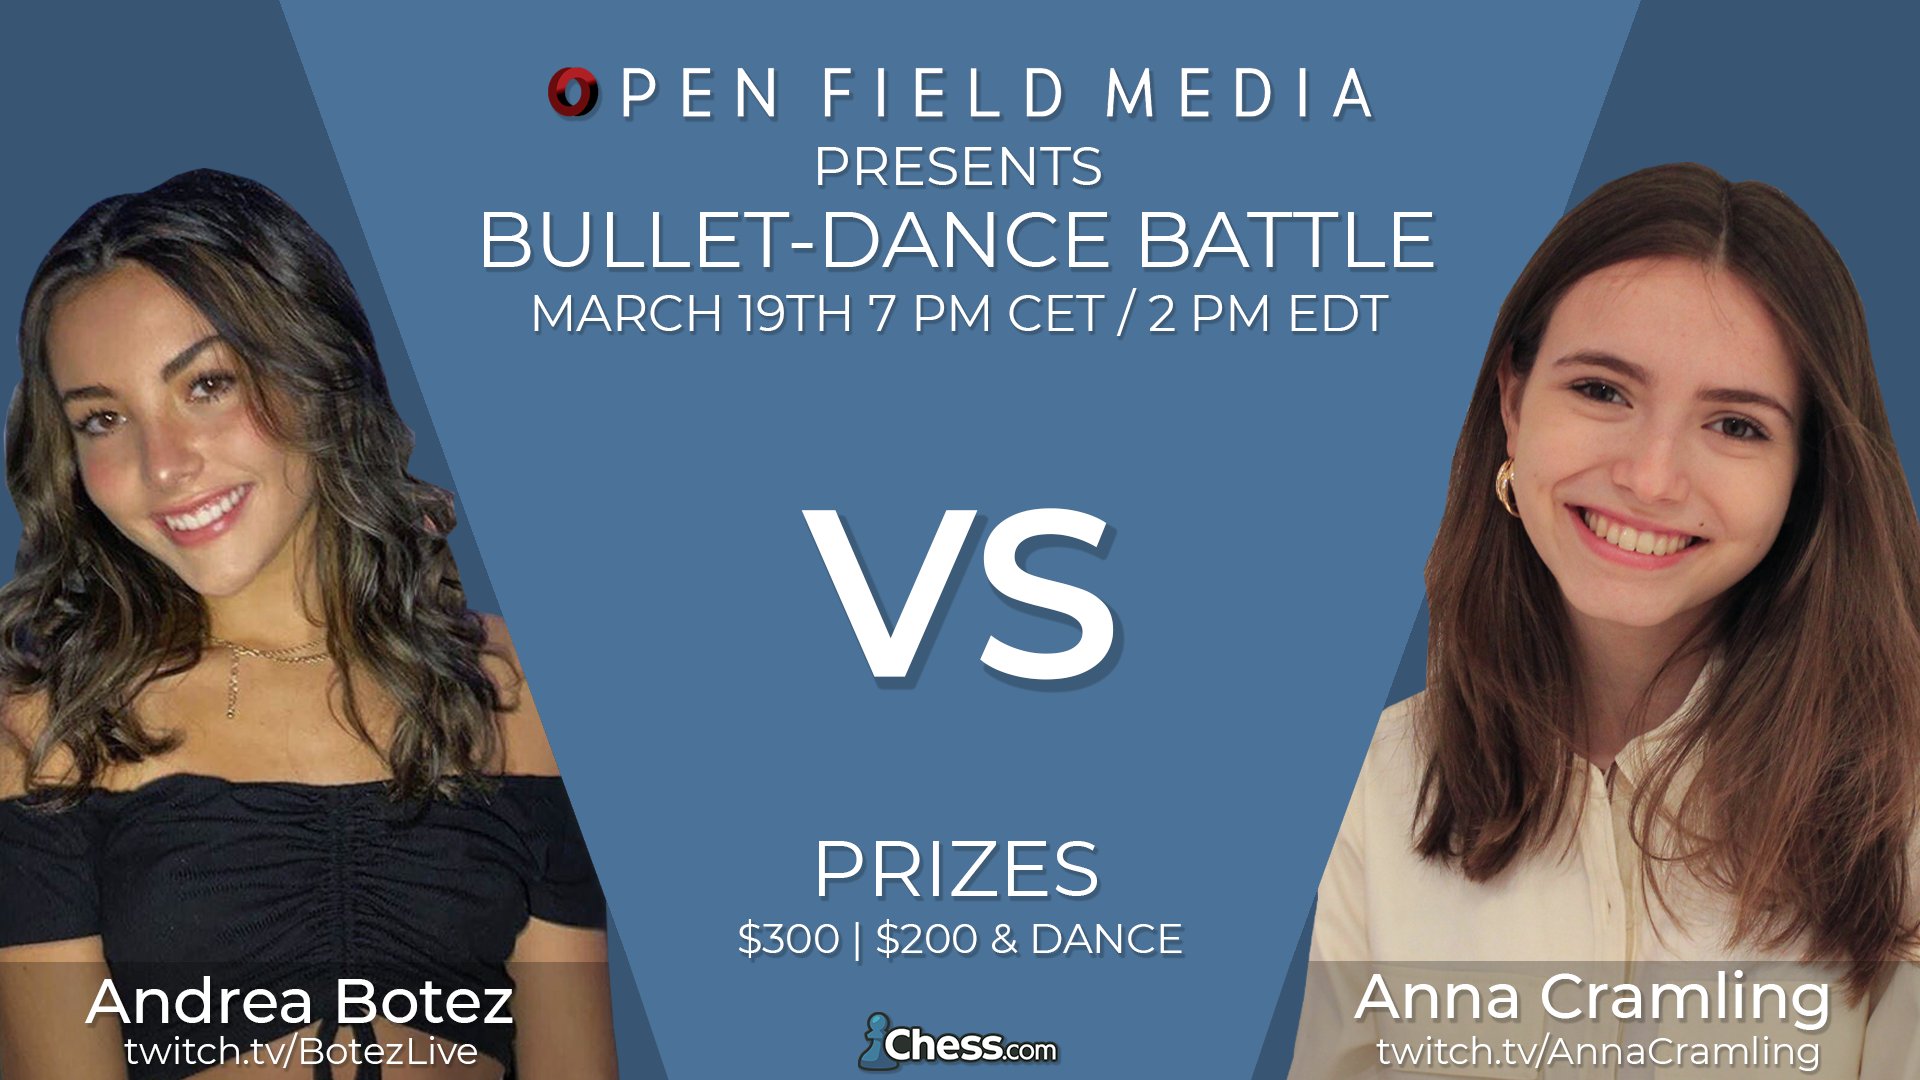 Anna Cramling on X: Andrea Botez and I are having a Bullet-Dance Battle,  where the loser has to dance something of the opponent's choice!! A special  thanks to  for arranging this